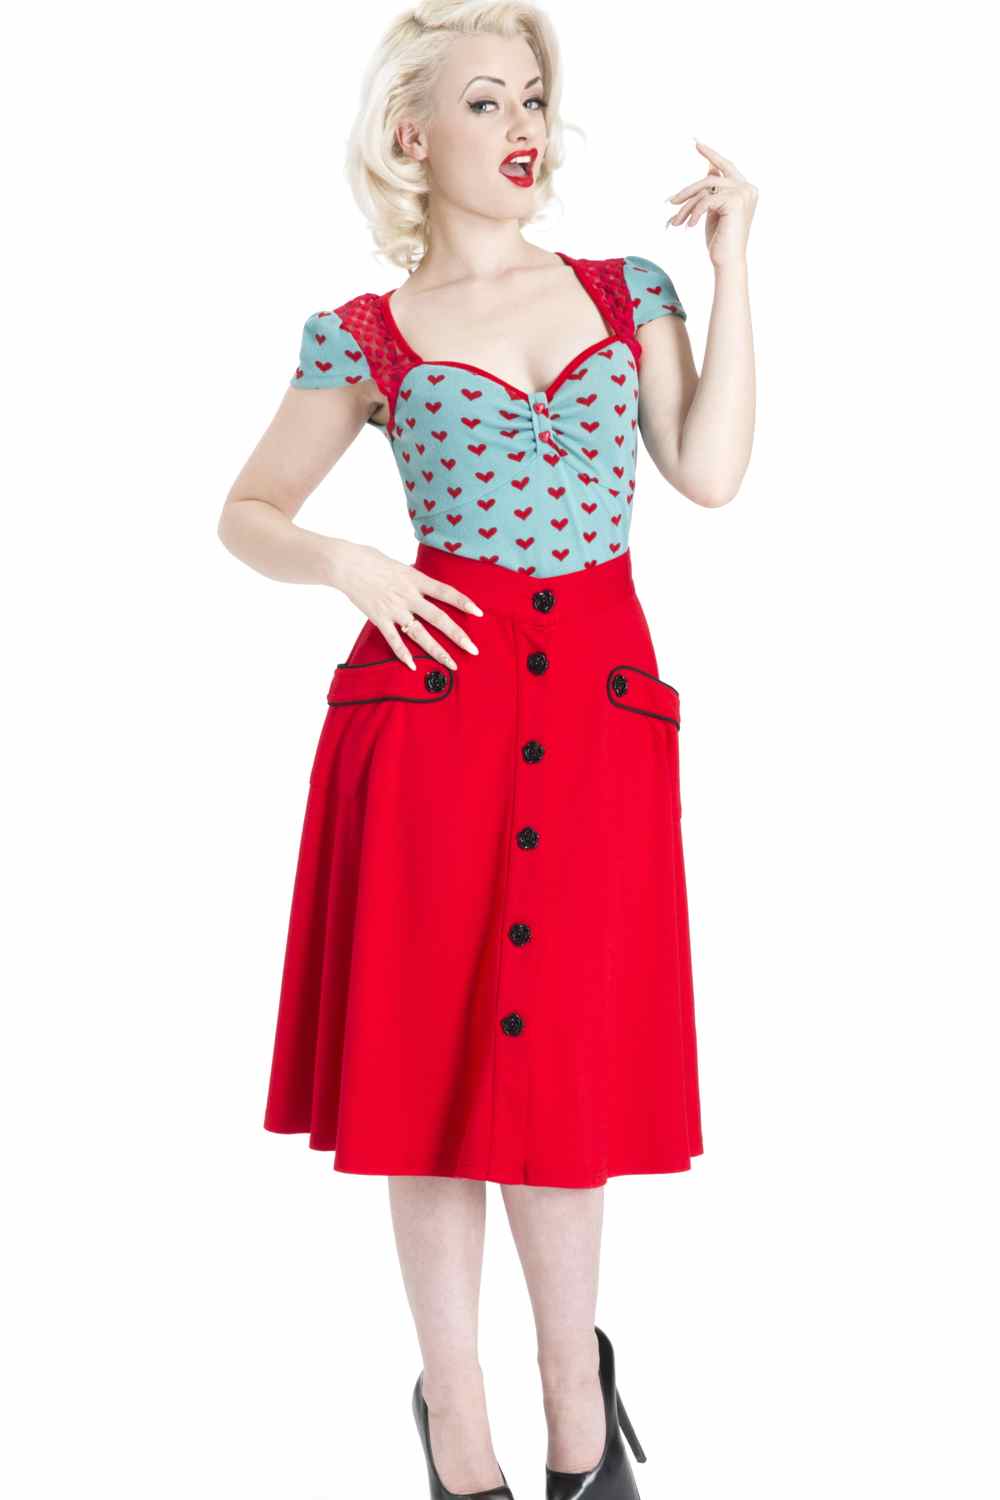 Red Rockabilly Skirt - Separates | Pinup Empire Clothing